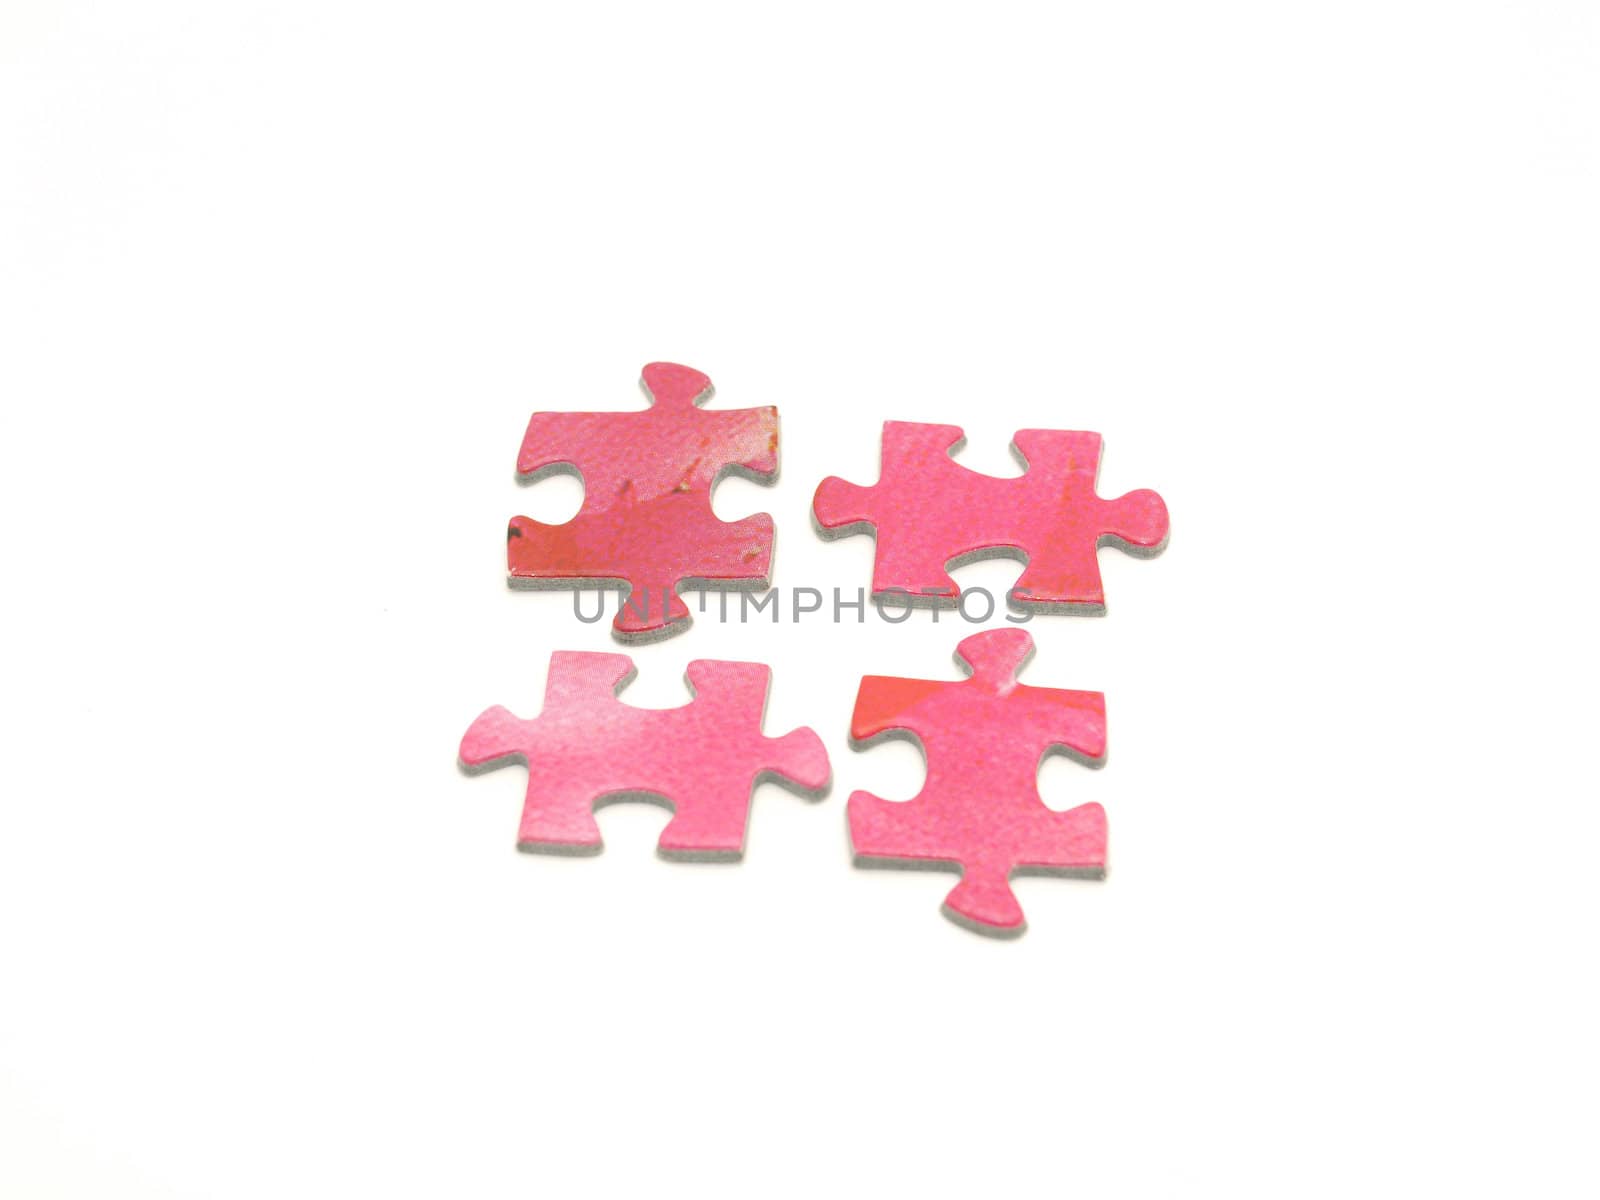 Puzzle pieces on a white background           